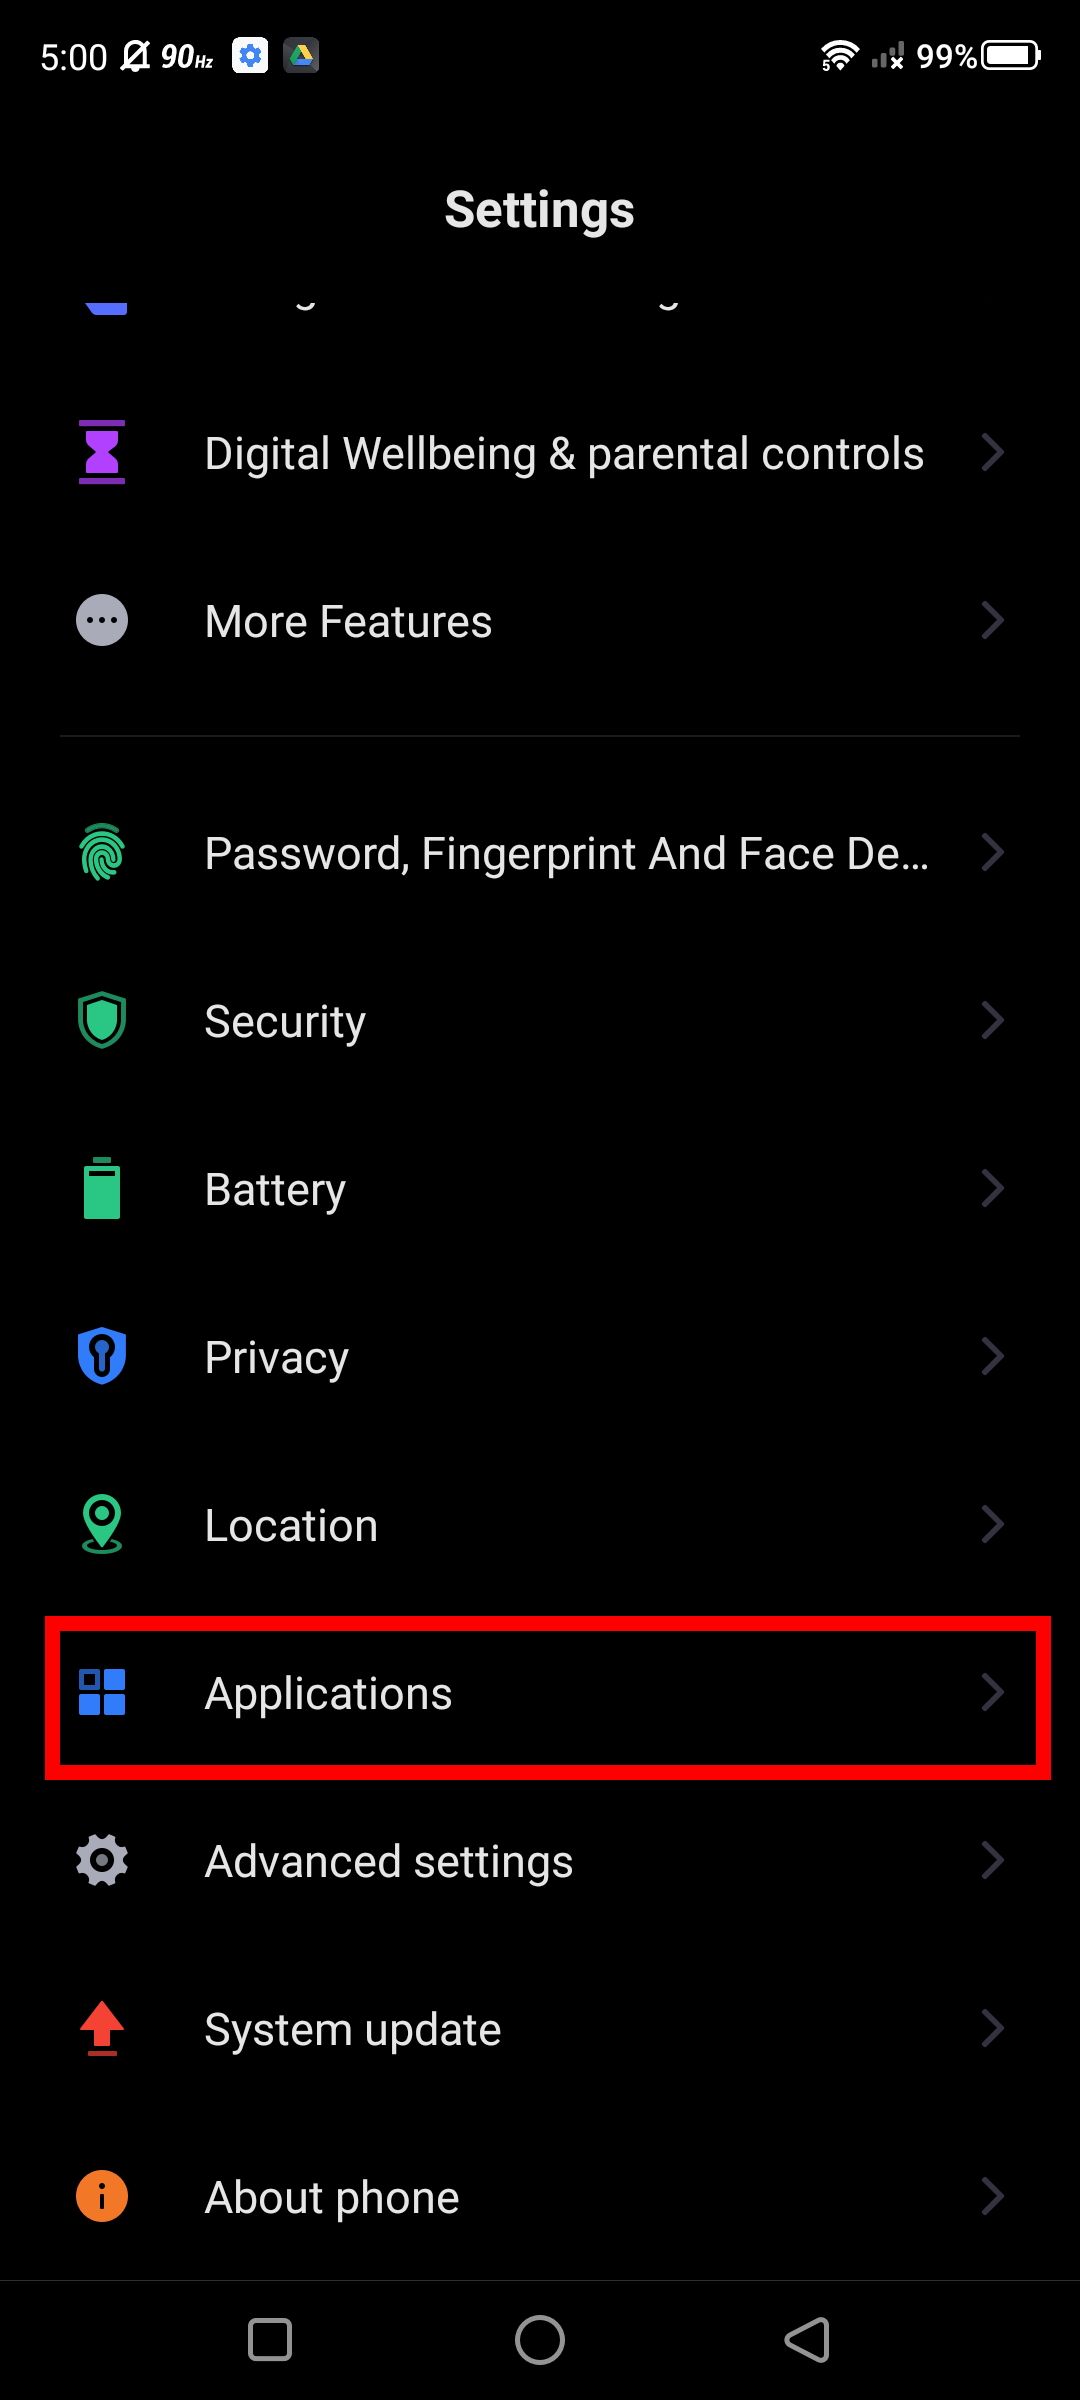 Red rectangle over application in Android phone settings